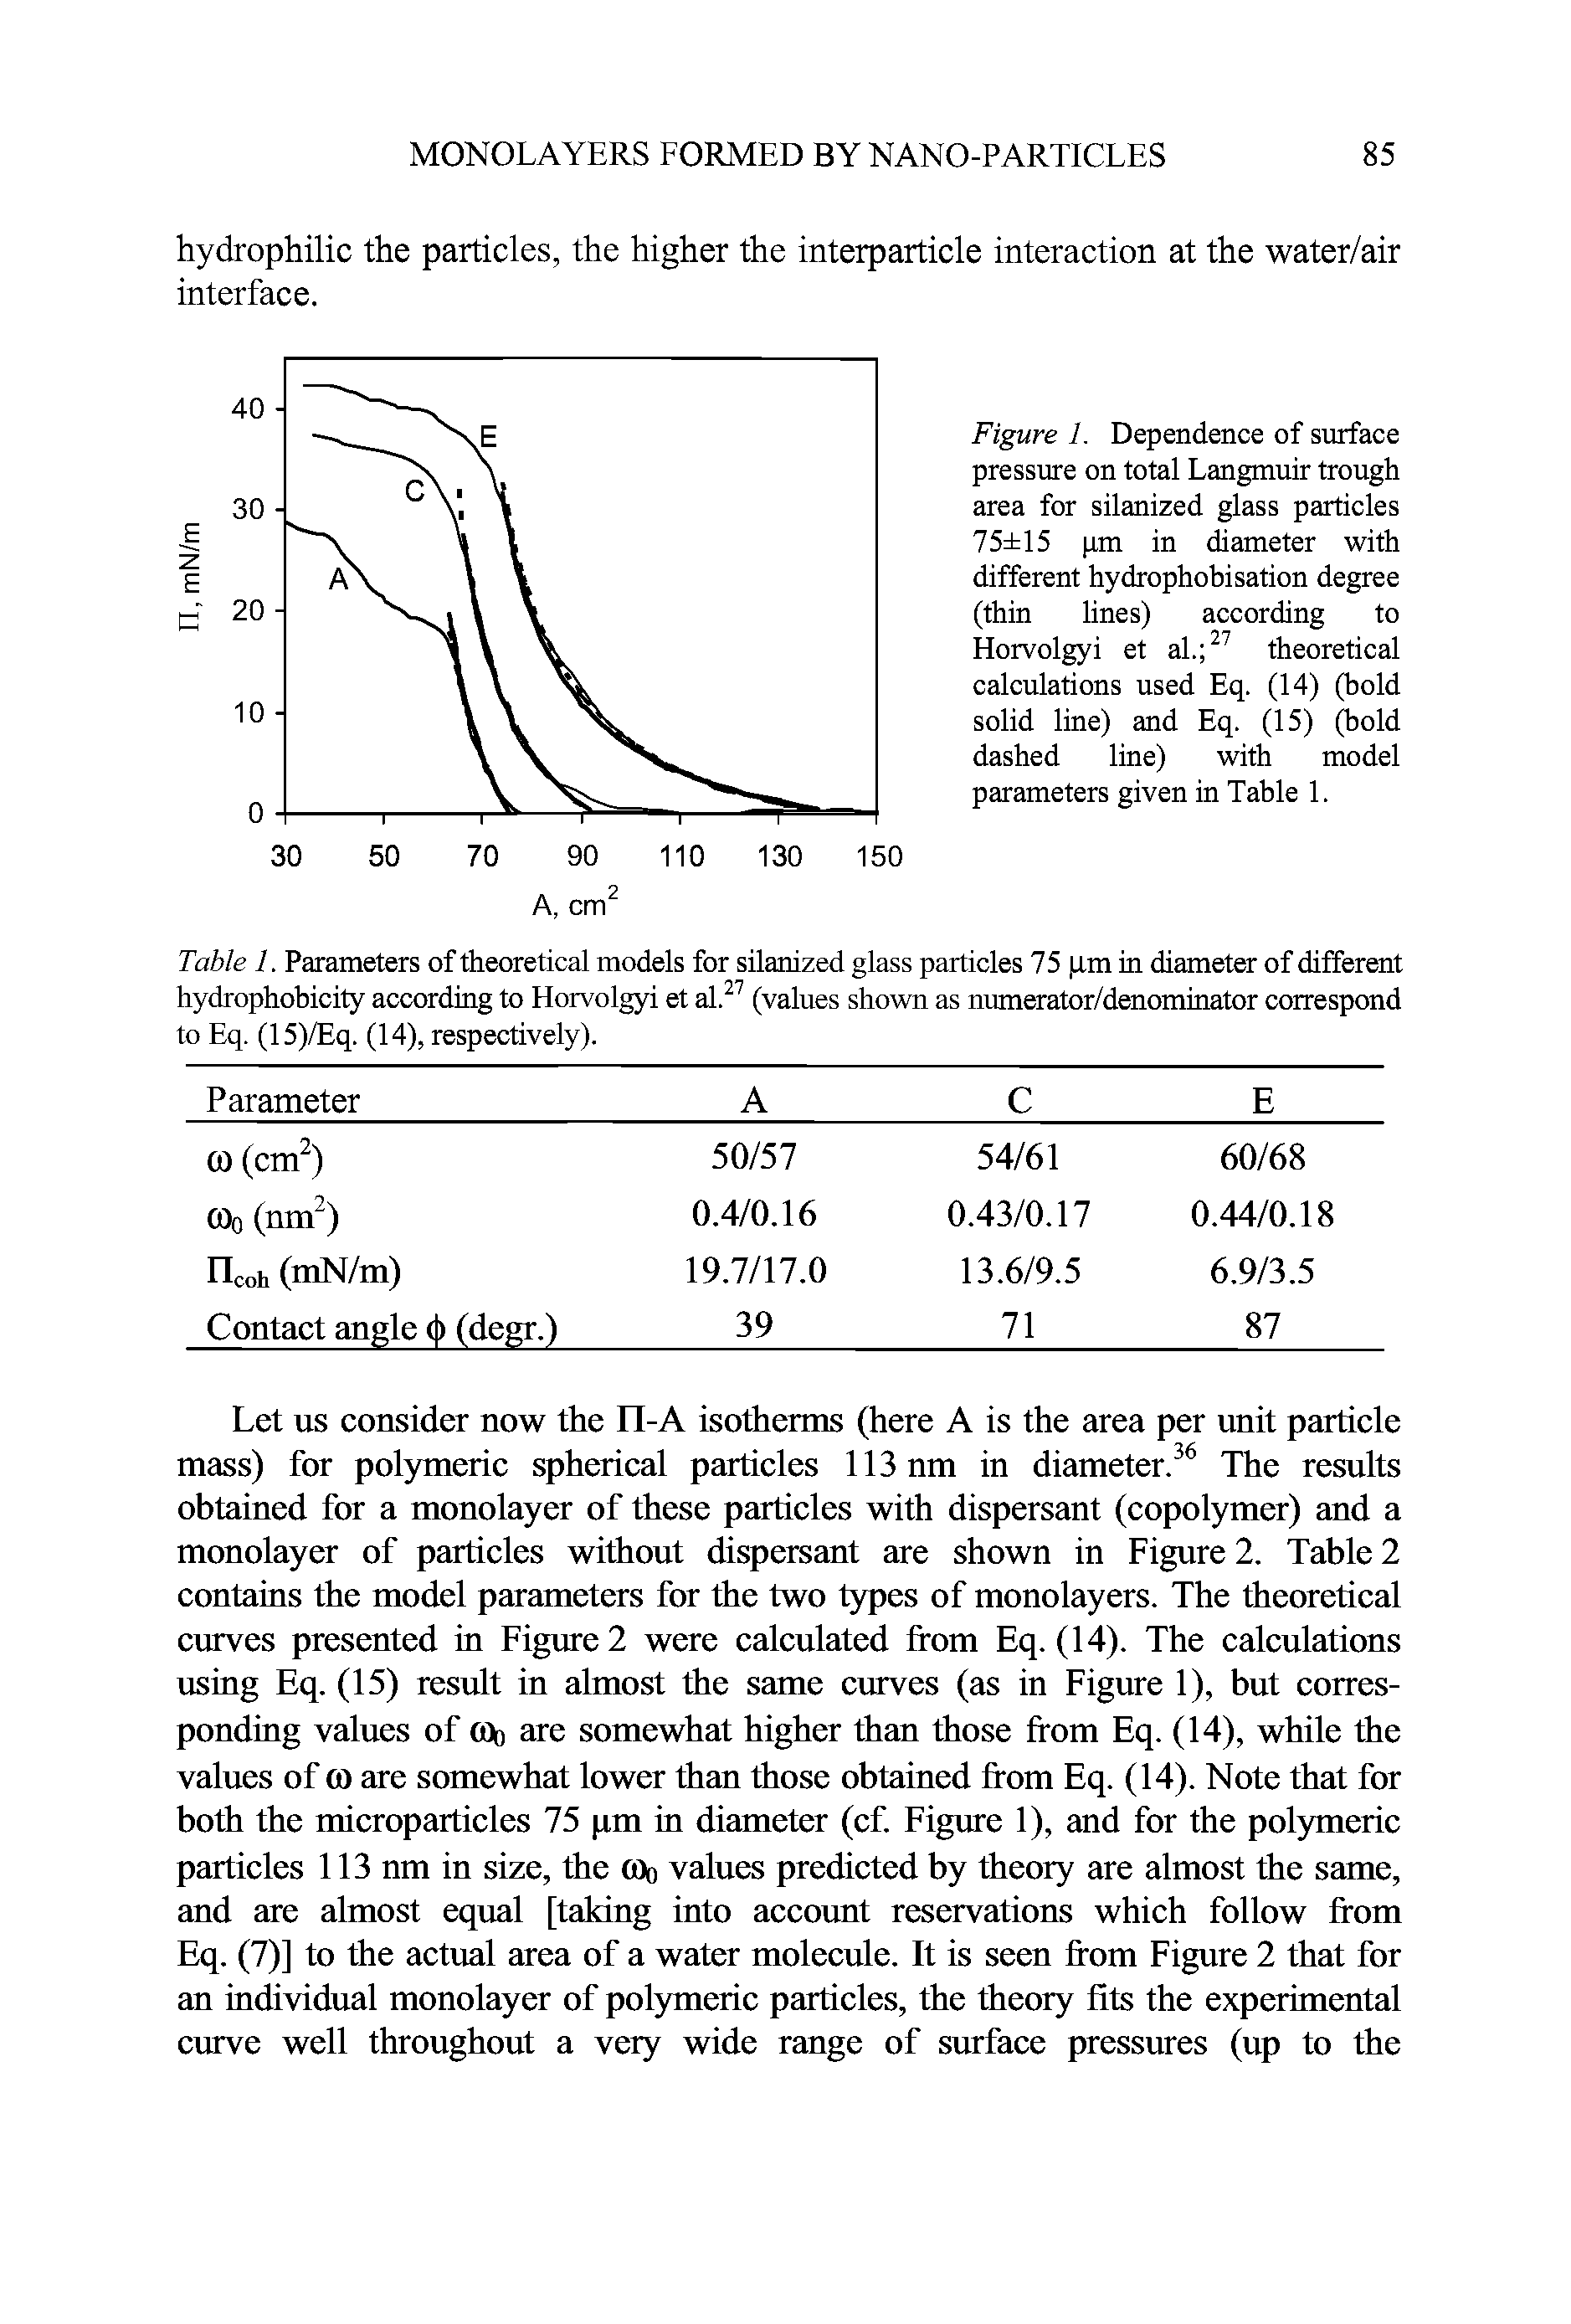 Figure 1. Dependence of surface pressure on total Langmuir trough area for silanized glass particles 75 15 pm in diameter with different hydrophobisation degree (thin lines) according to Horvolgyi et al. 27 theoretical calculations used Eq. (14) (bold solid line) and Eq. (15) (bold dashed line) with model parameters given in Table 1.